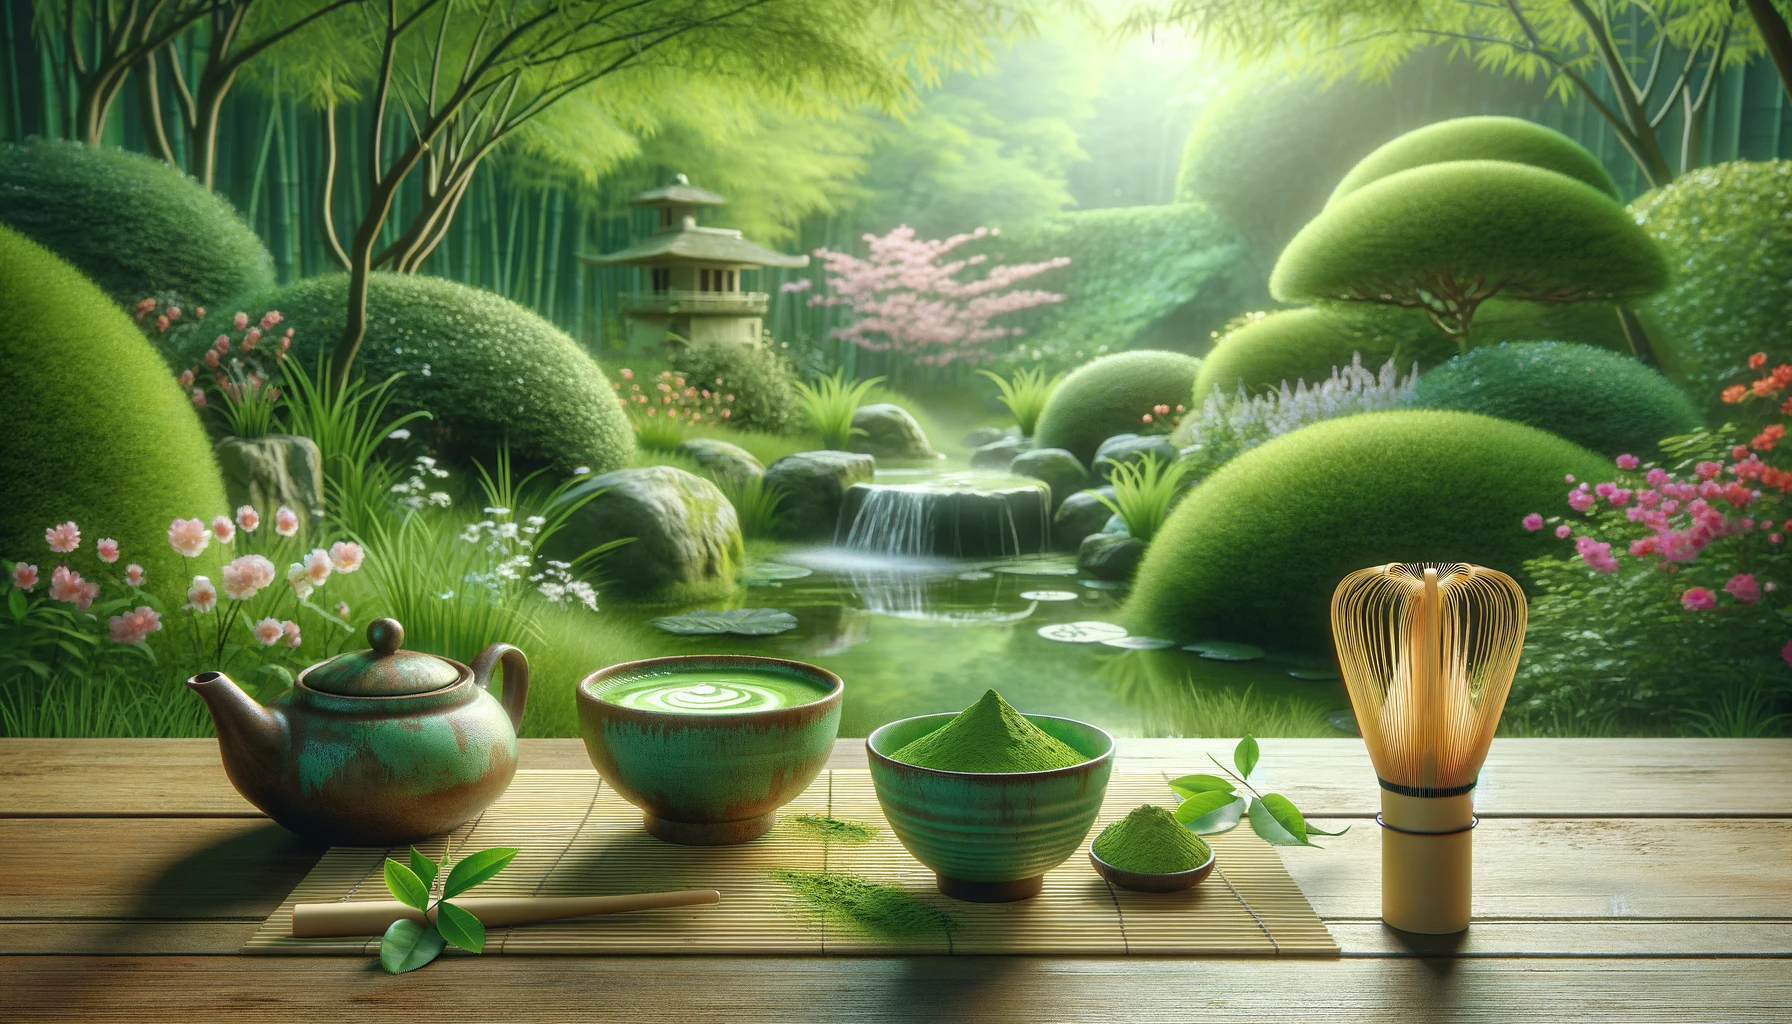 A serene garden setting with a traditional matcha tea set on a bamboo mat, bright green matcha powder, and a whisk. The garden is lush and symbolizes growth